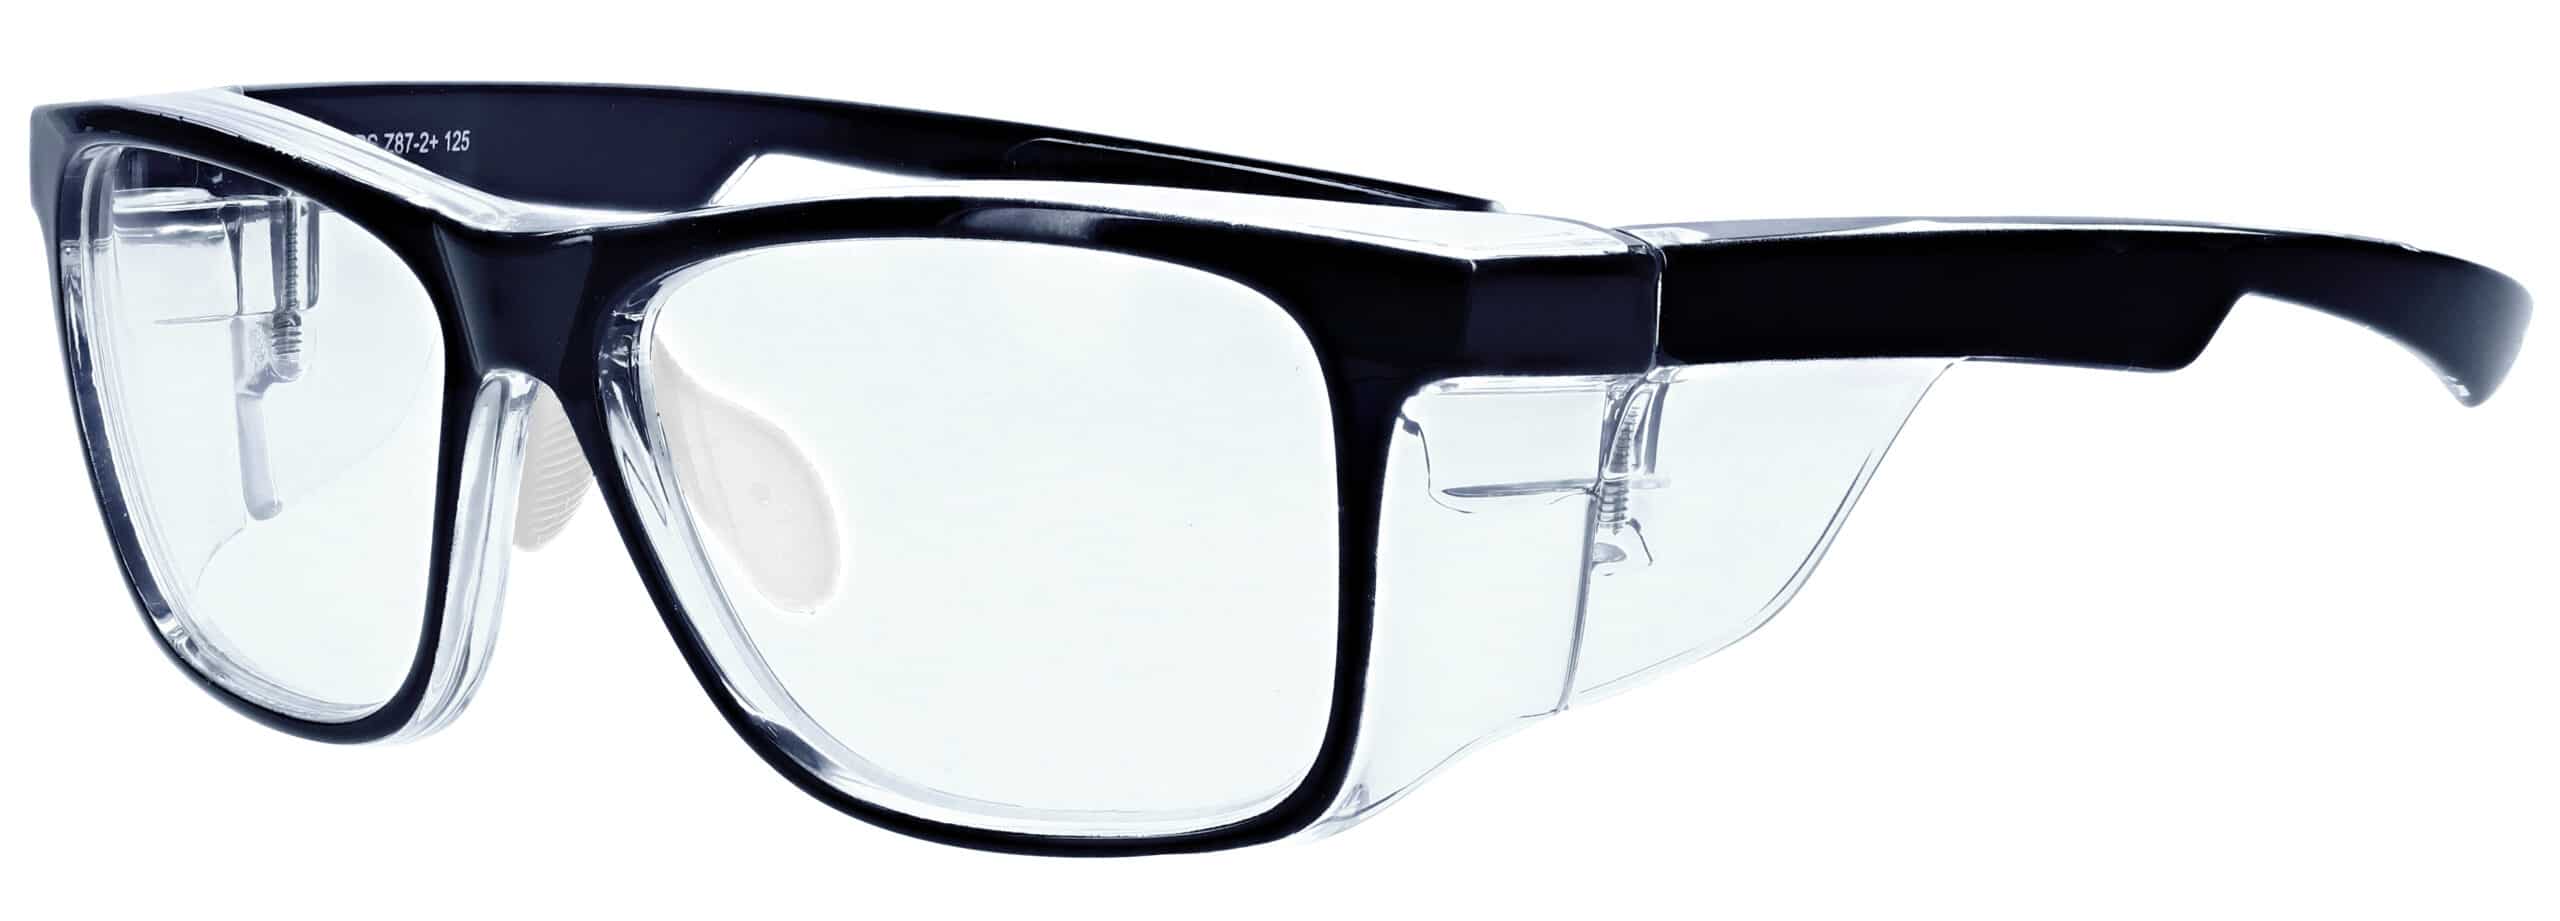 Prescription Safety Glasses RX-15011 - Safety Protection Glasses